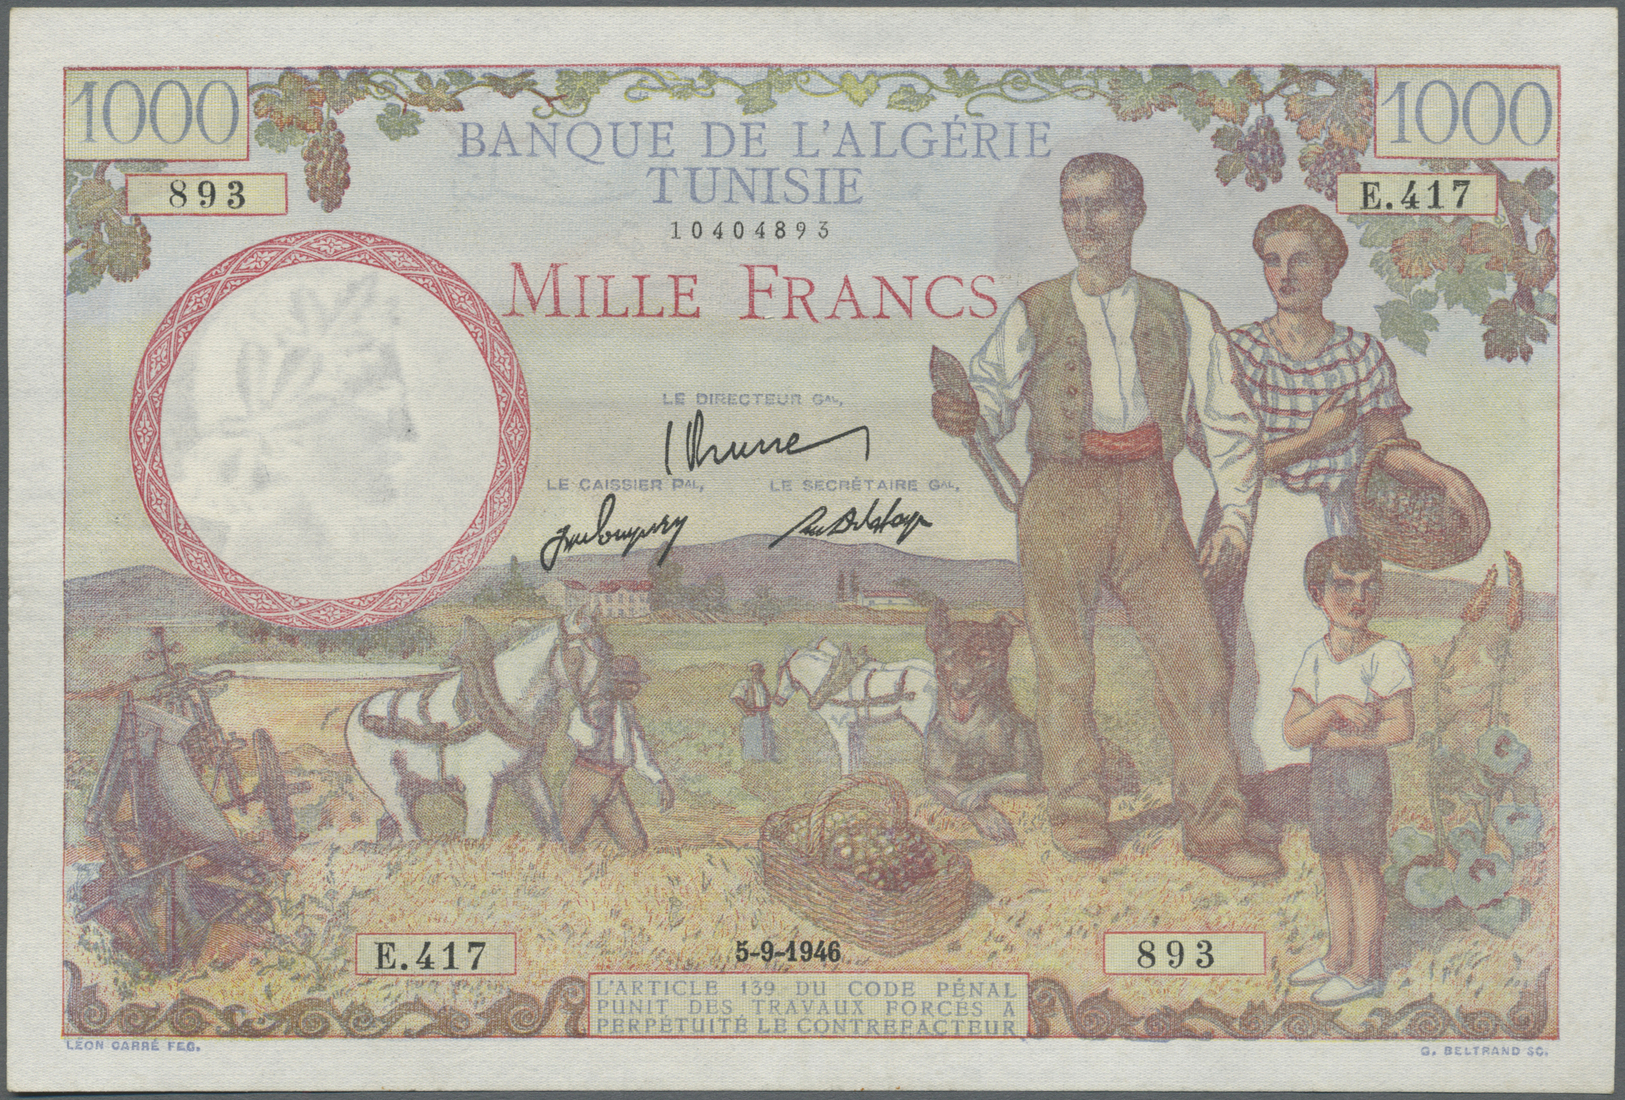 03114 Tunisia / Tunisien: 1000 Francs 1946 P. 26, Used With Light Folds But No Holes Or Tears, Still Crispness In Paper - Tunisie